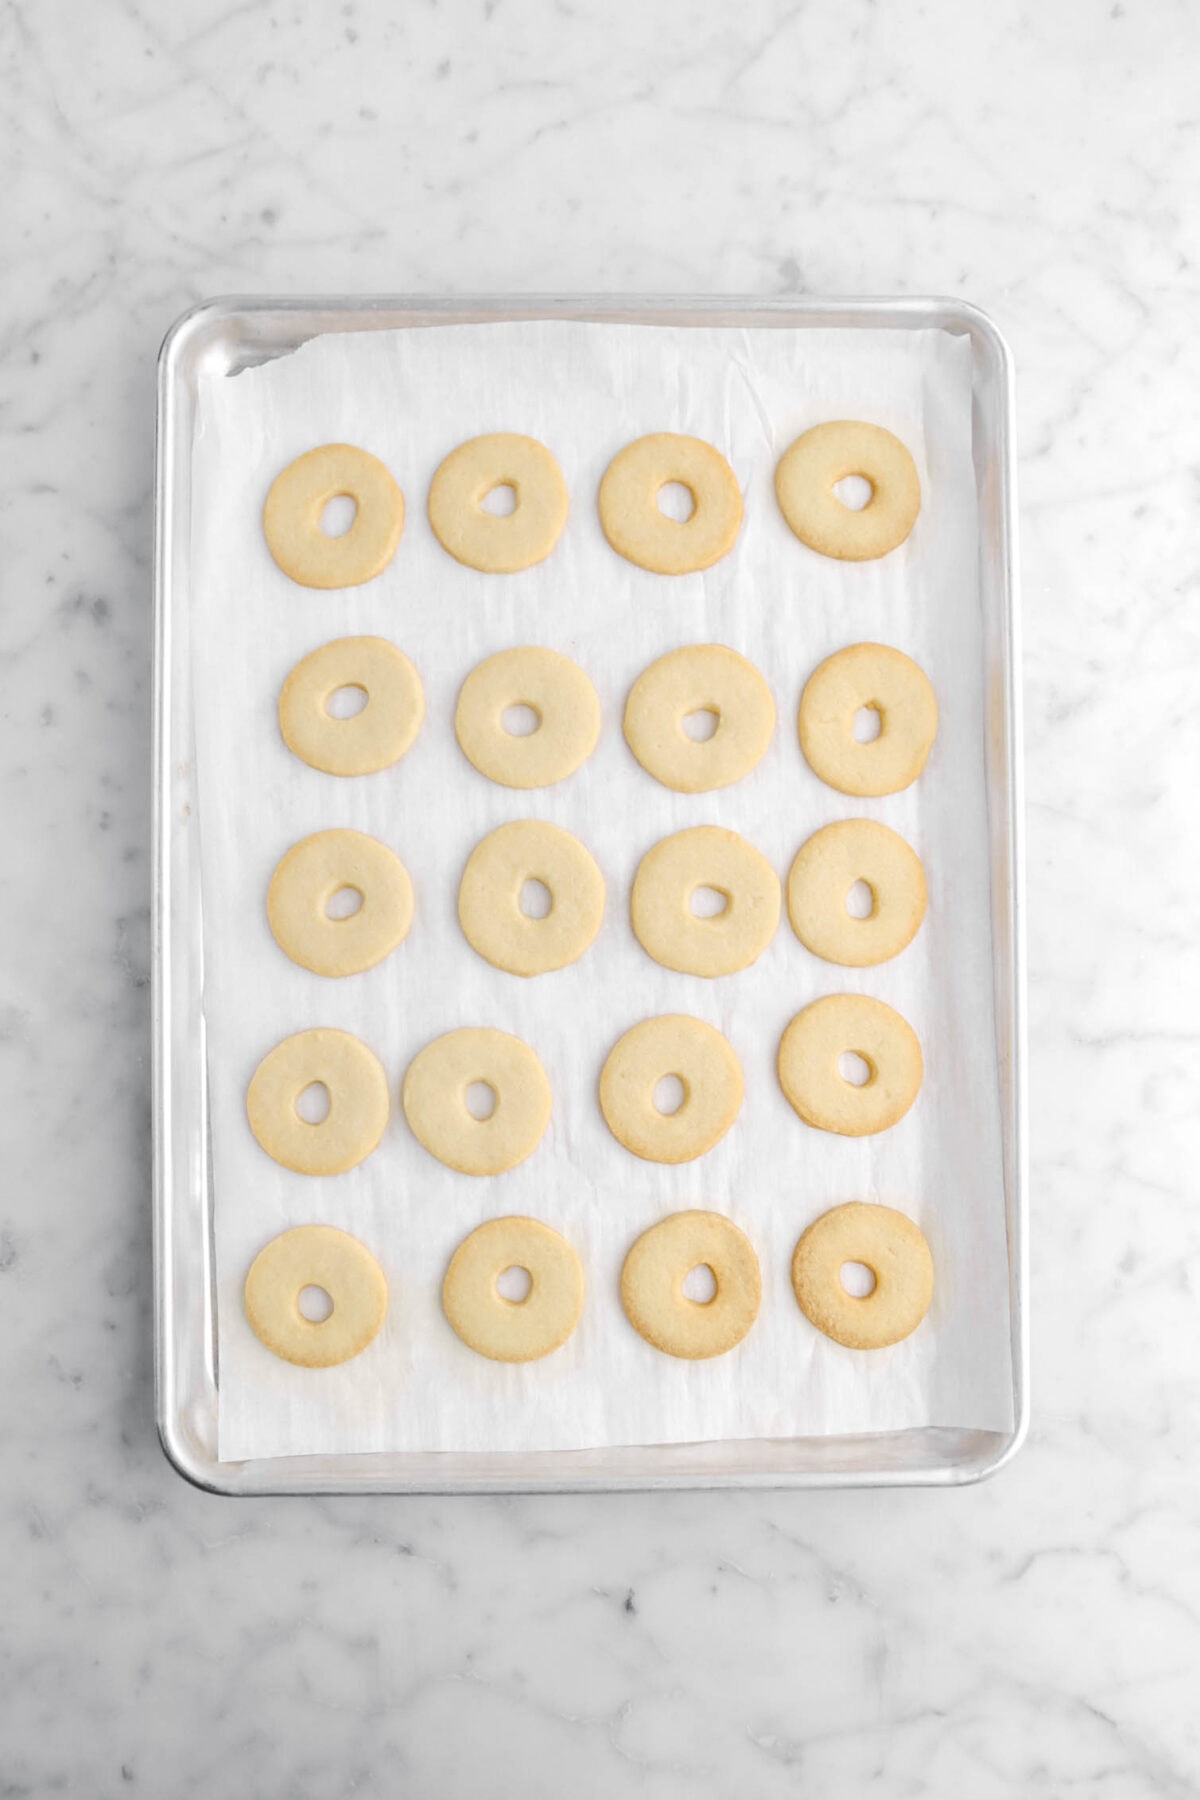 baked ring shaped shortbread cookies on lined sheet pan.